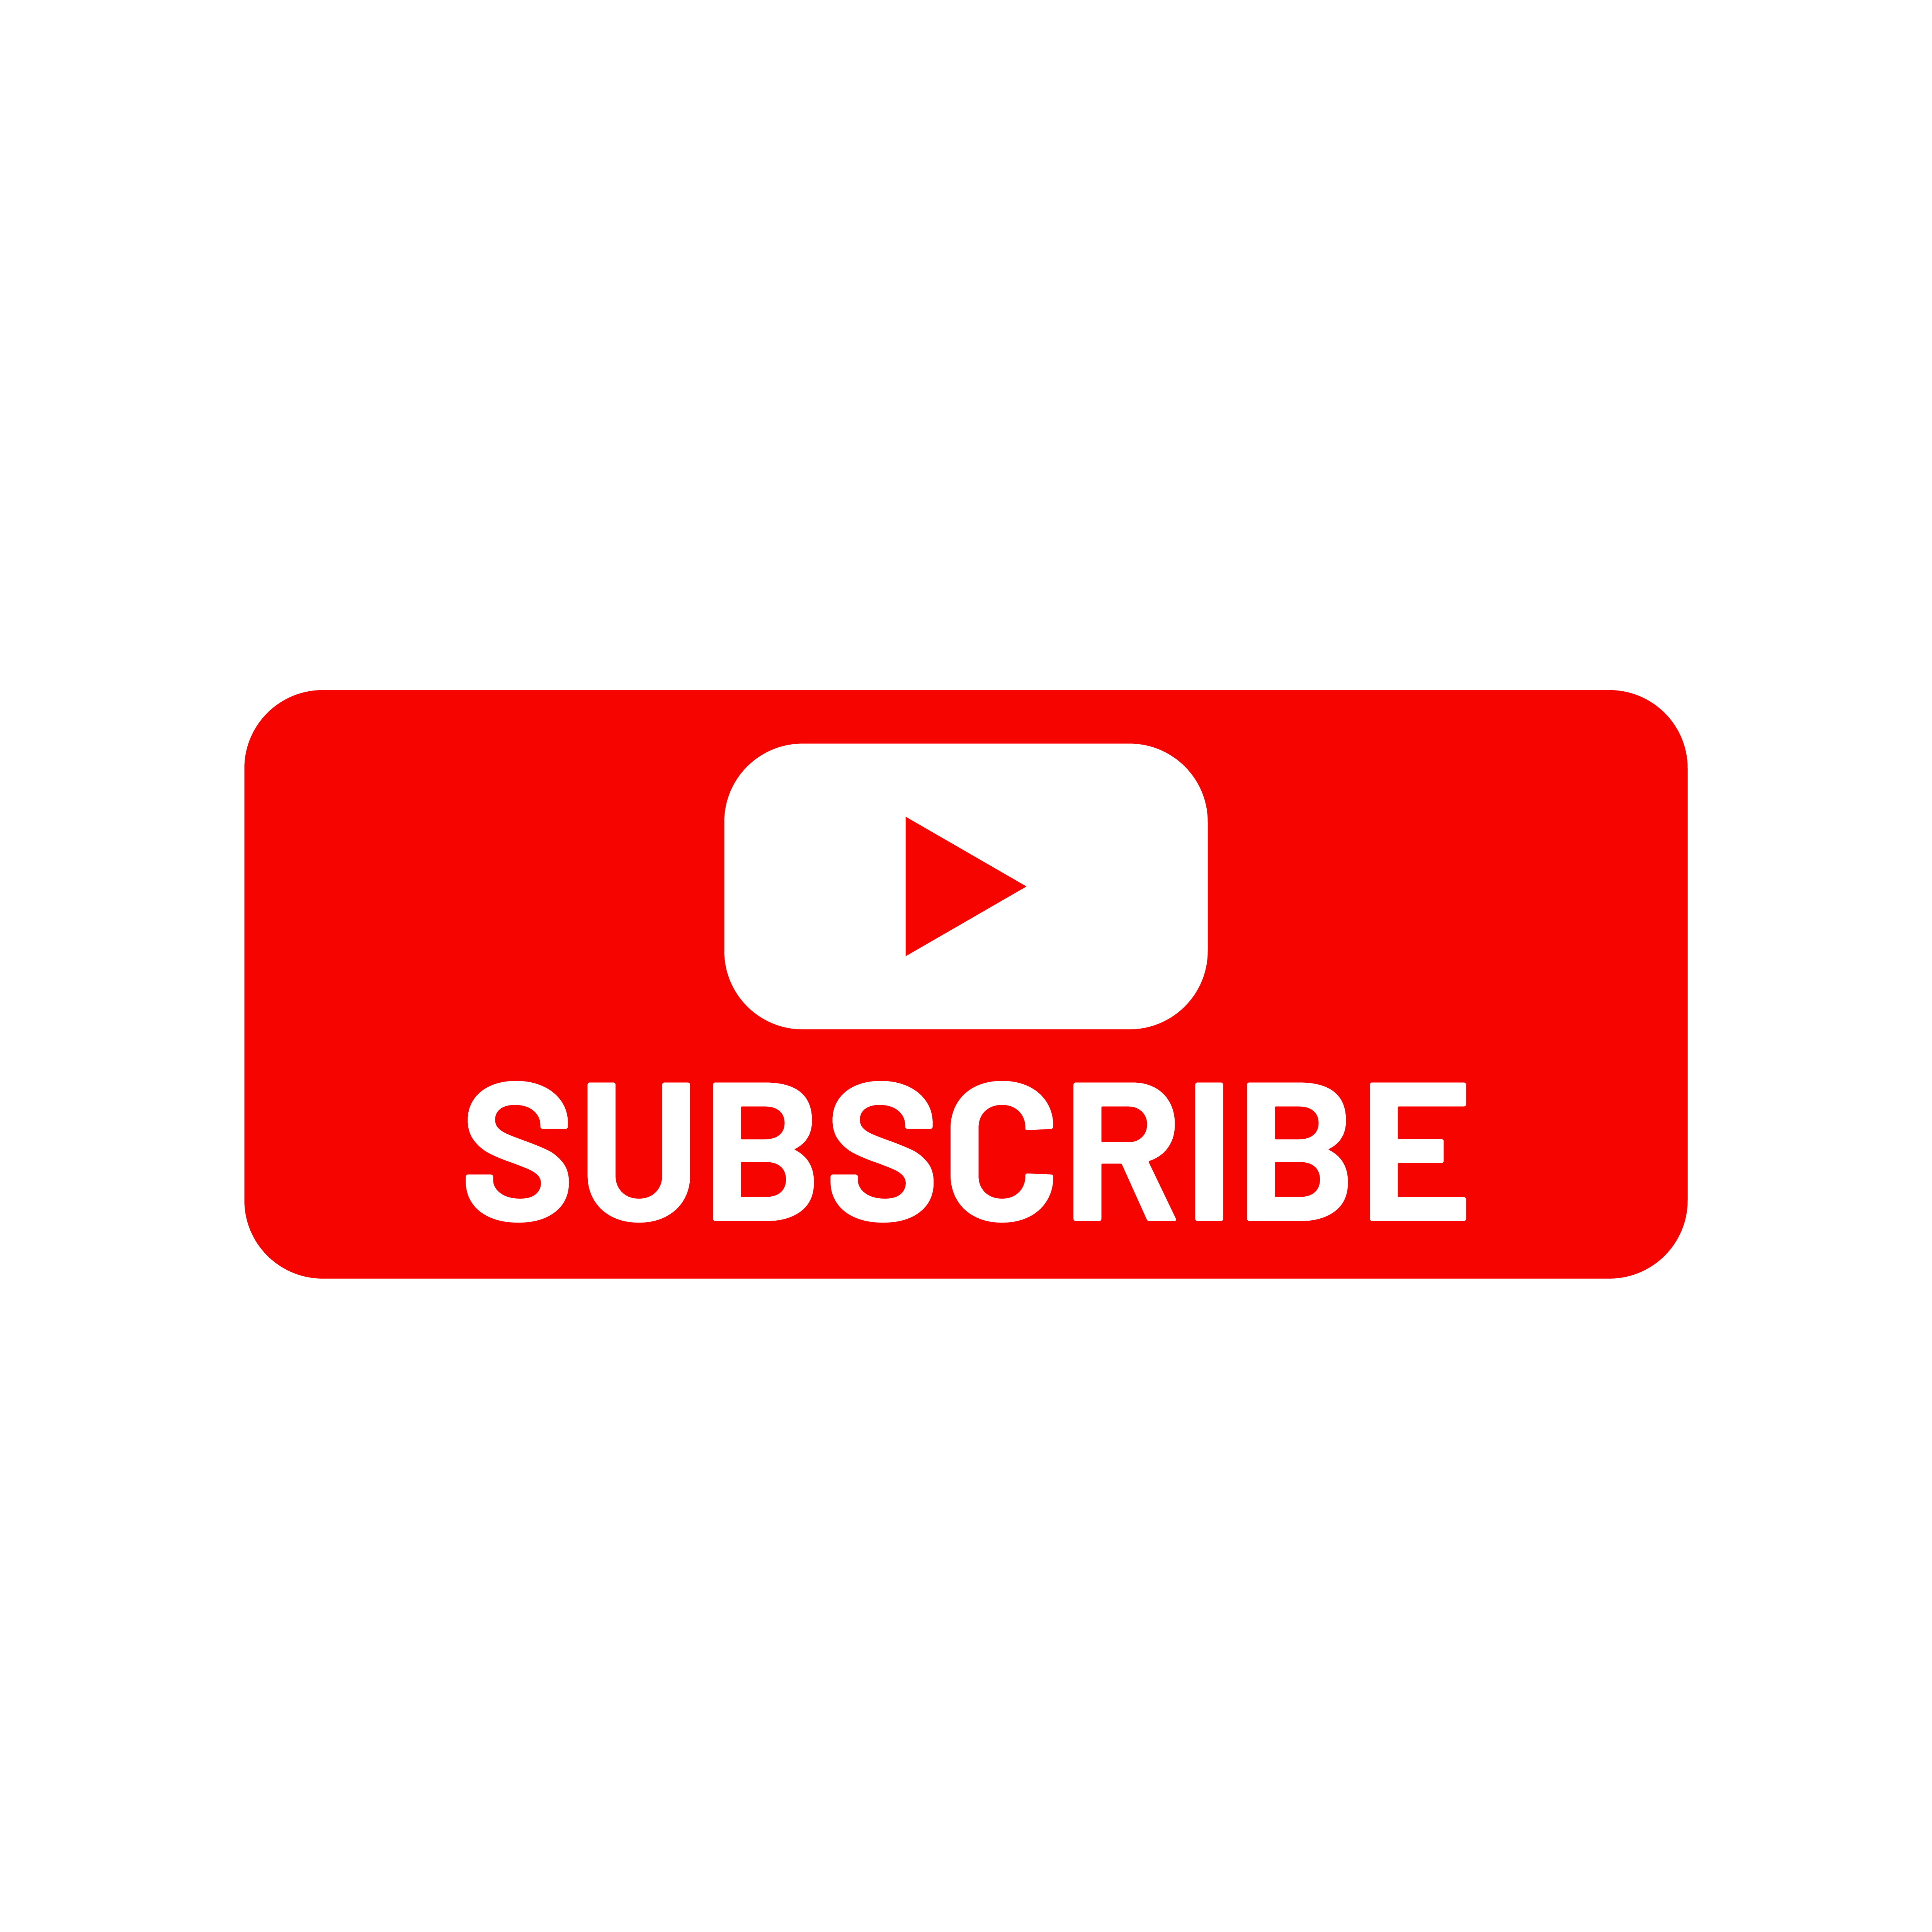 youtube subscrbe button png